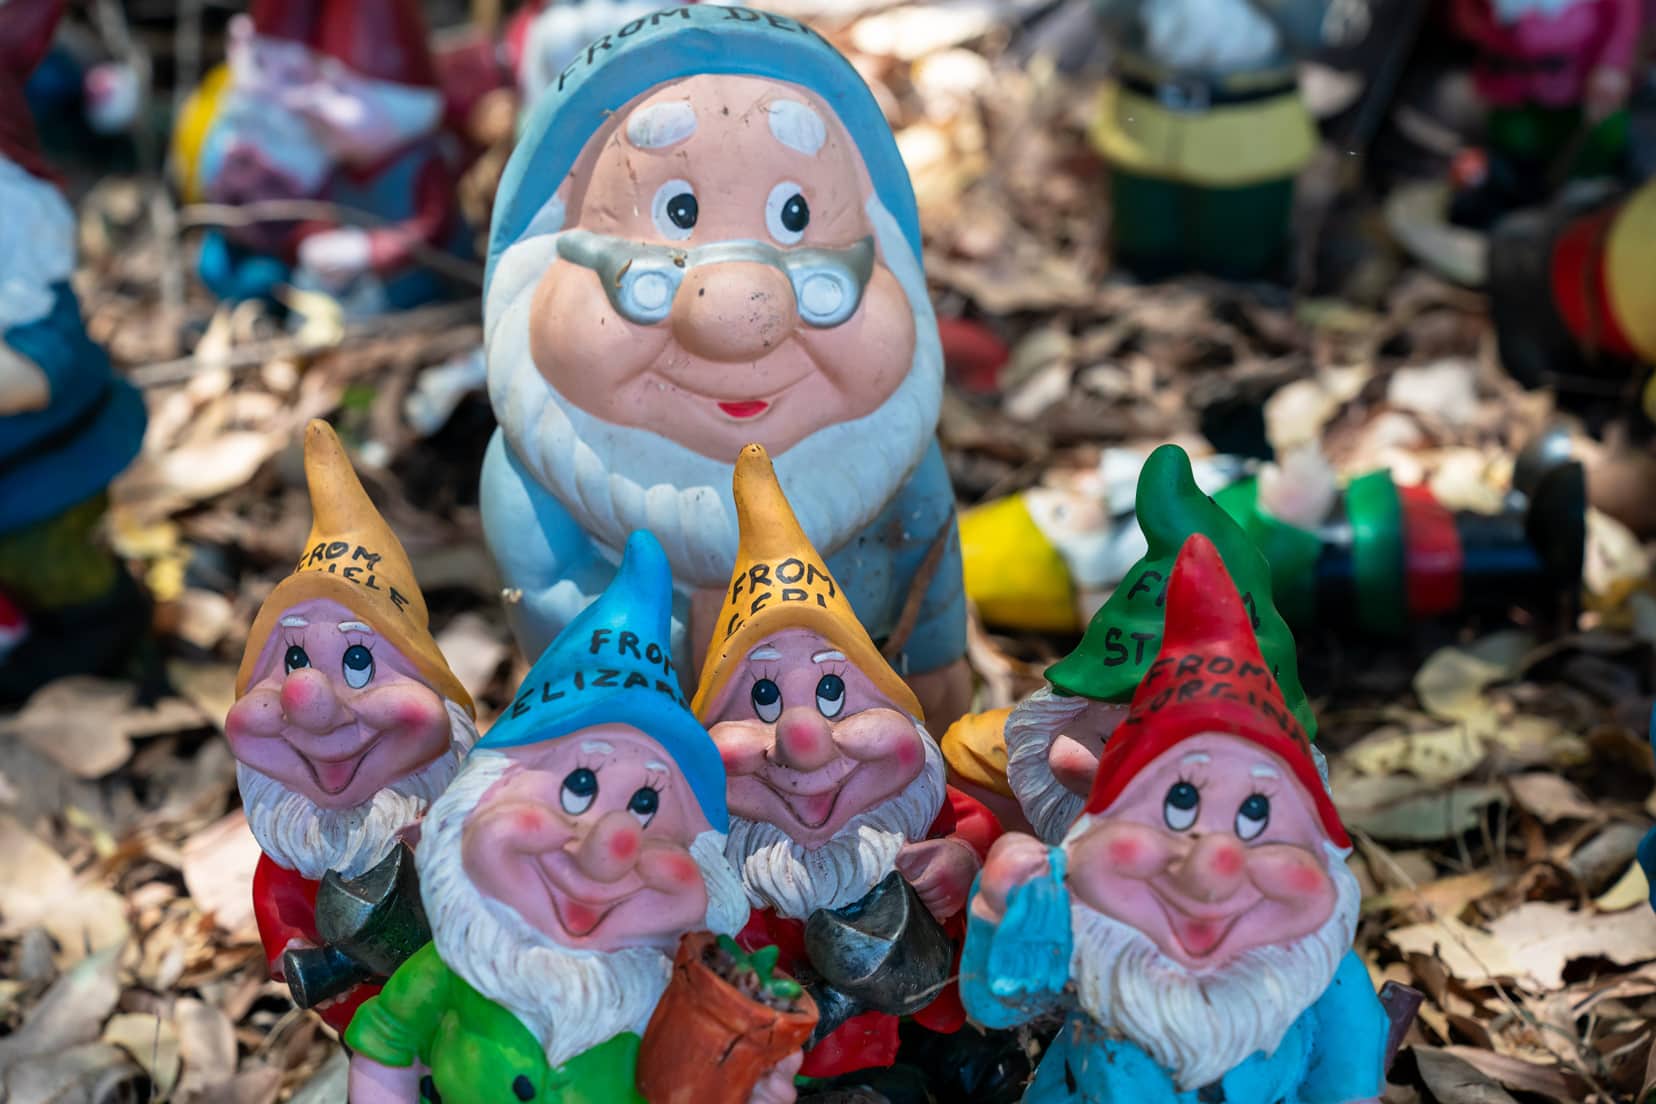 Gnomes that look like dwarves